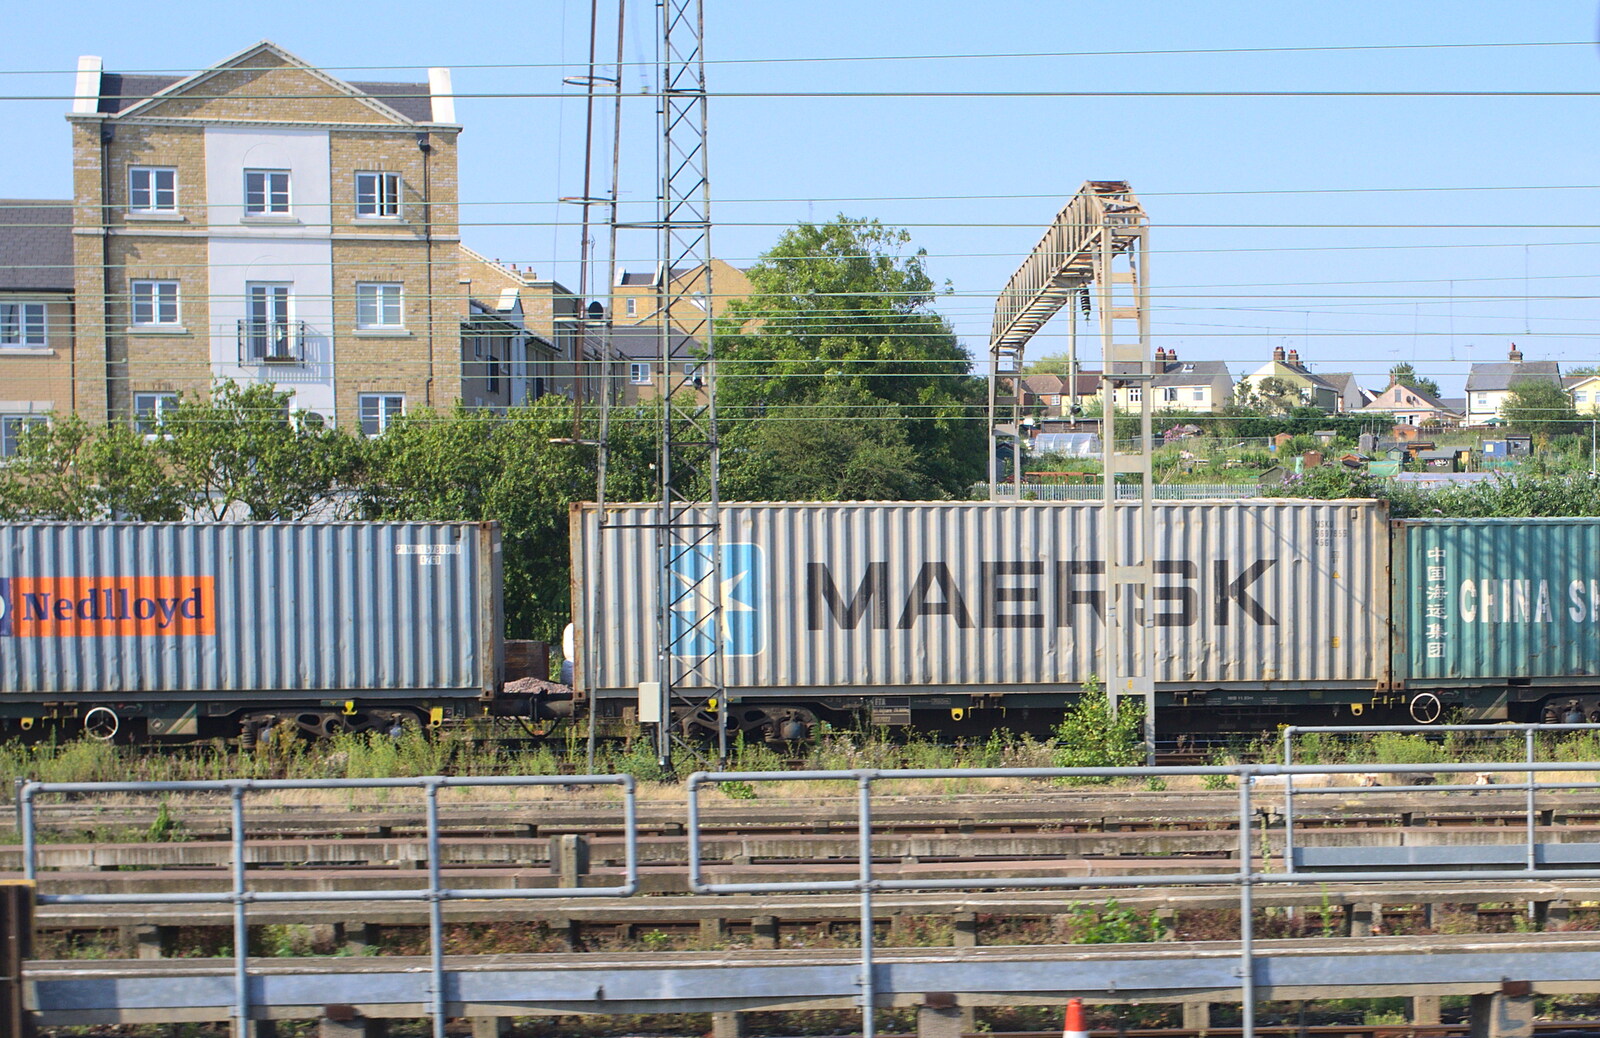 A stopped goods train from TouchType Office Life, Linton House, Union Street, Southwark - 25th July 2012